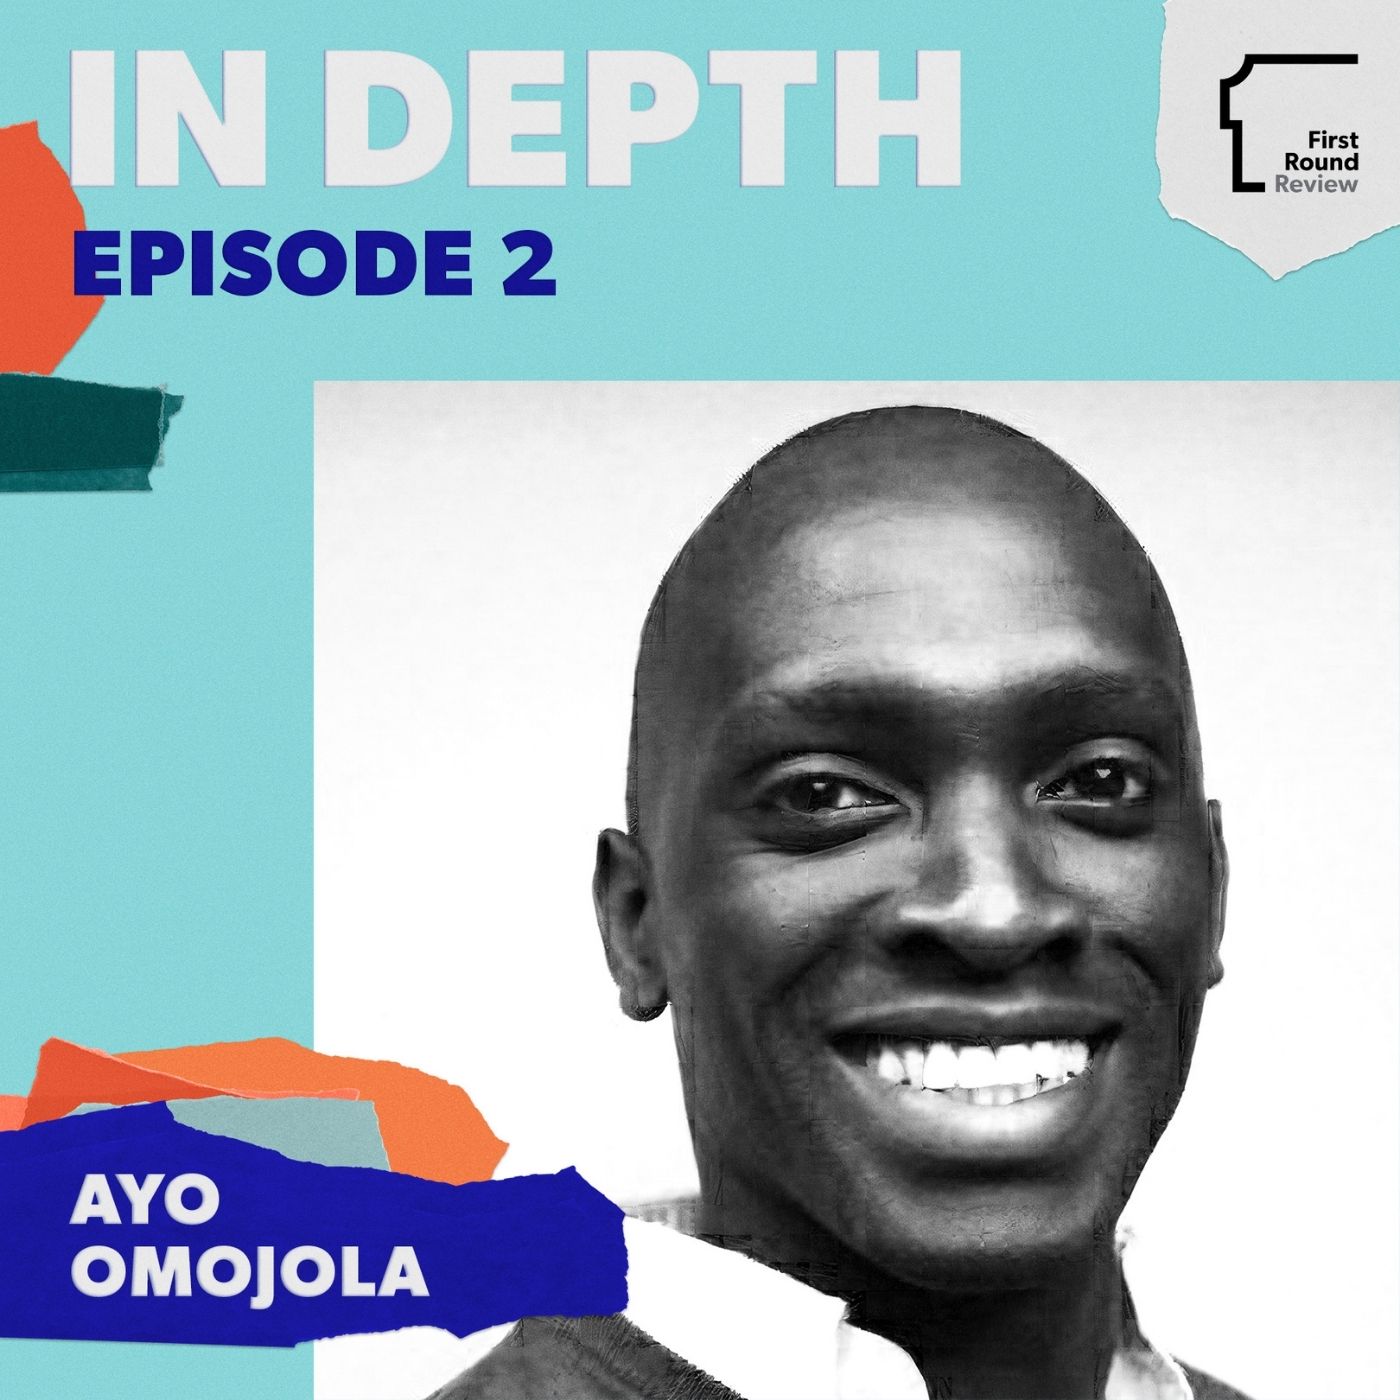 Product lessons from Cash App & Carbon Health — Ayo Omojola on going “unreasonably deep”